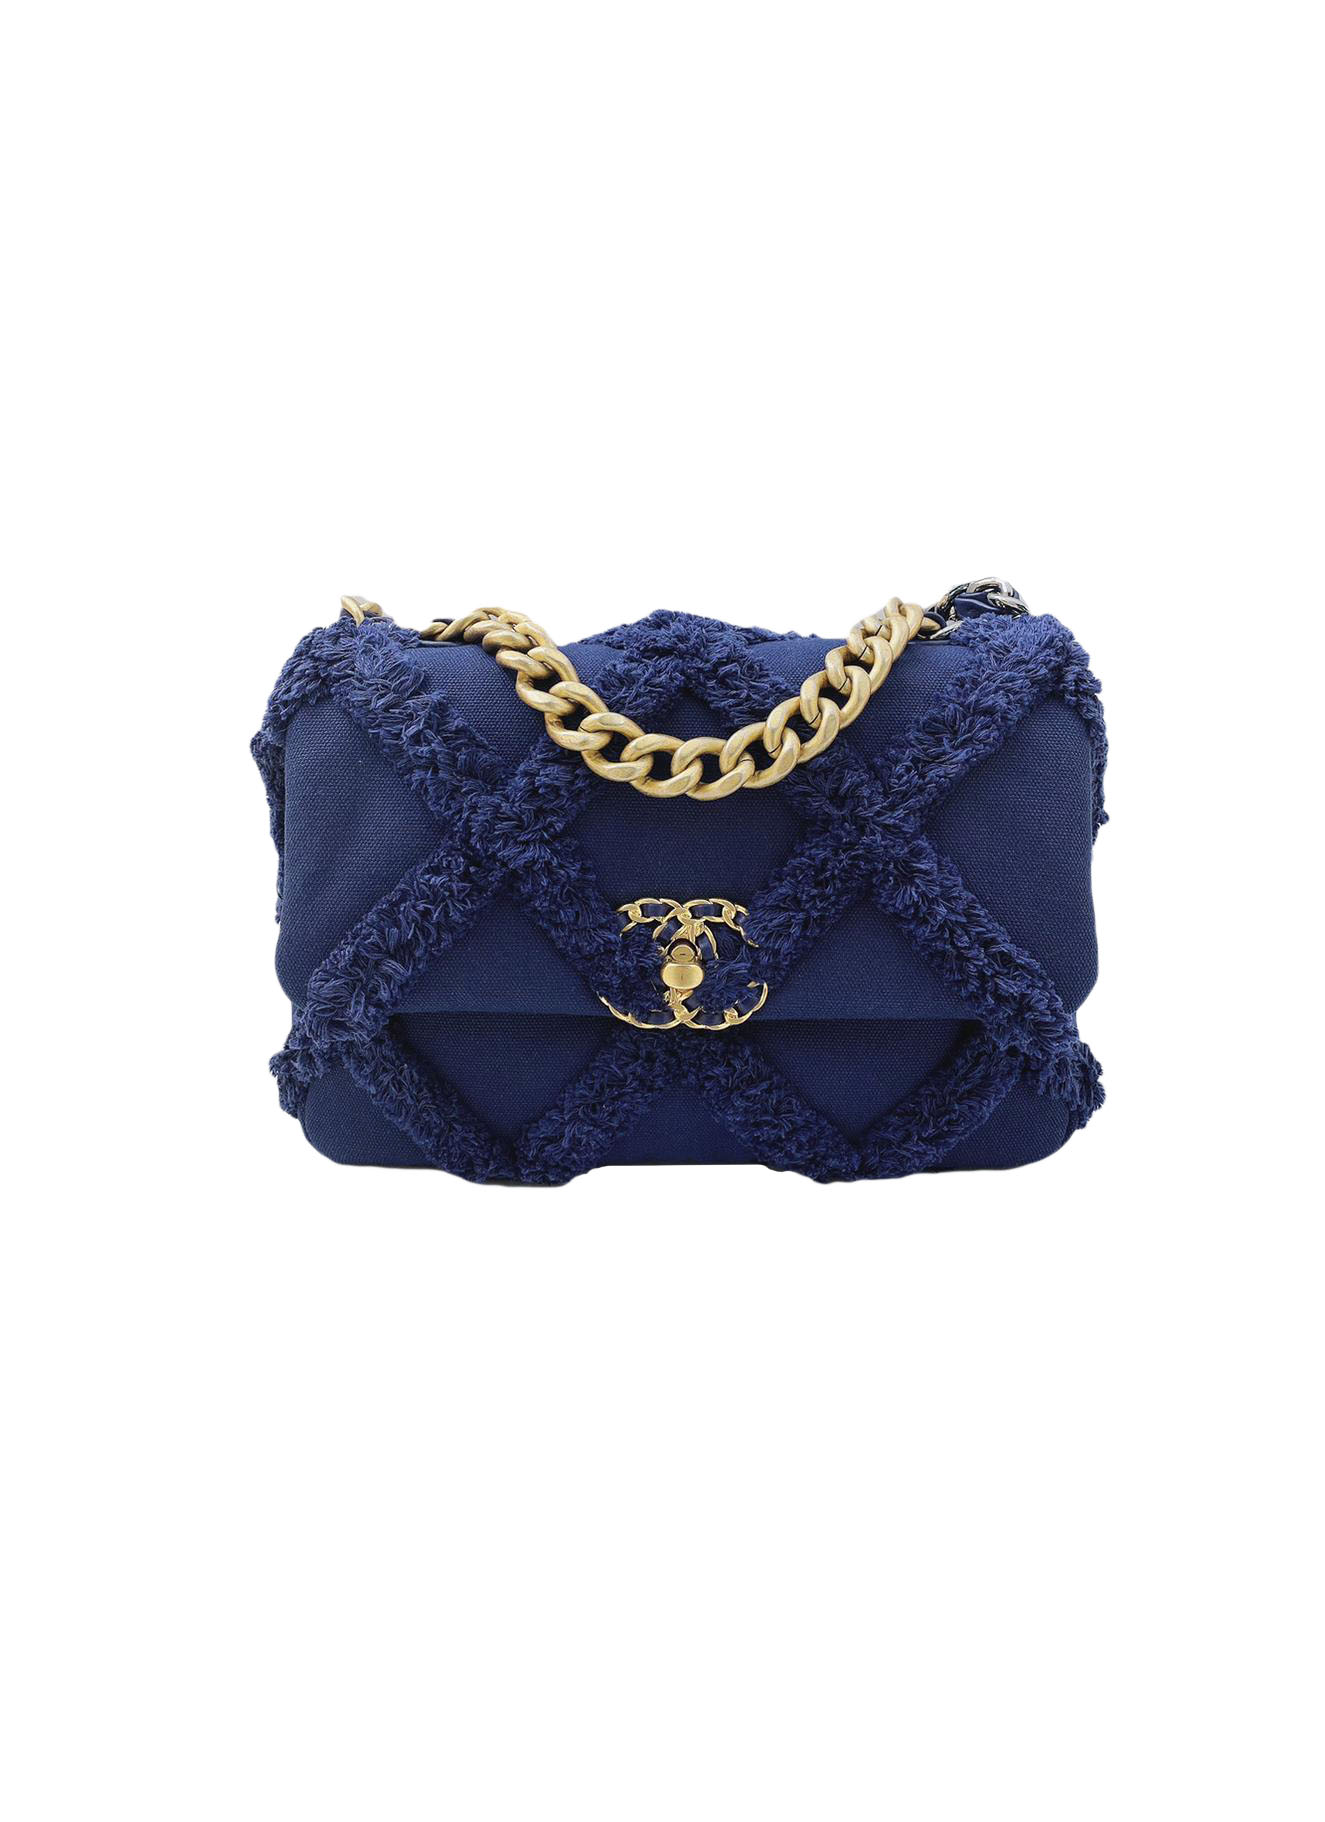 Chanel 19 Large, 21S Navy Blue Lambskin Leather, Preowned in Box WA001 -  Julia Rose Boston